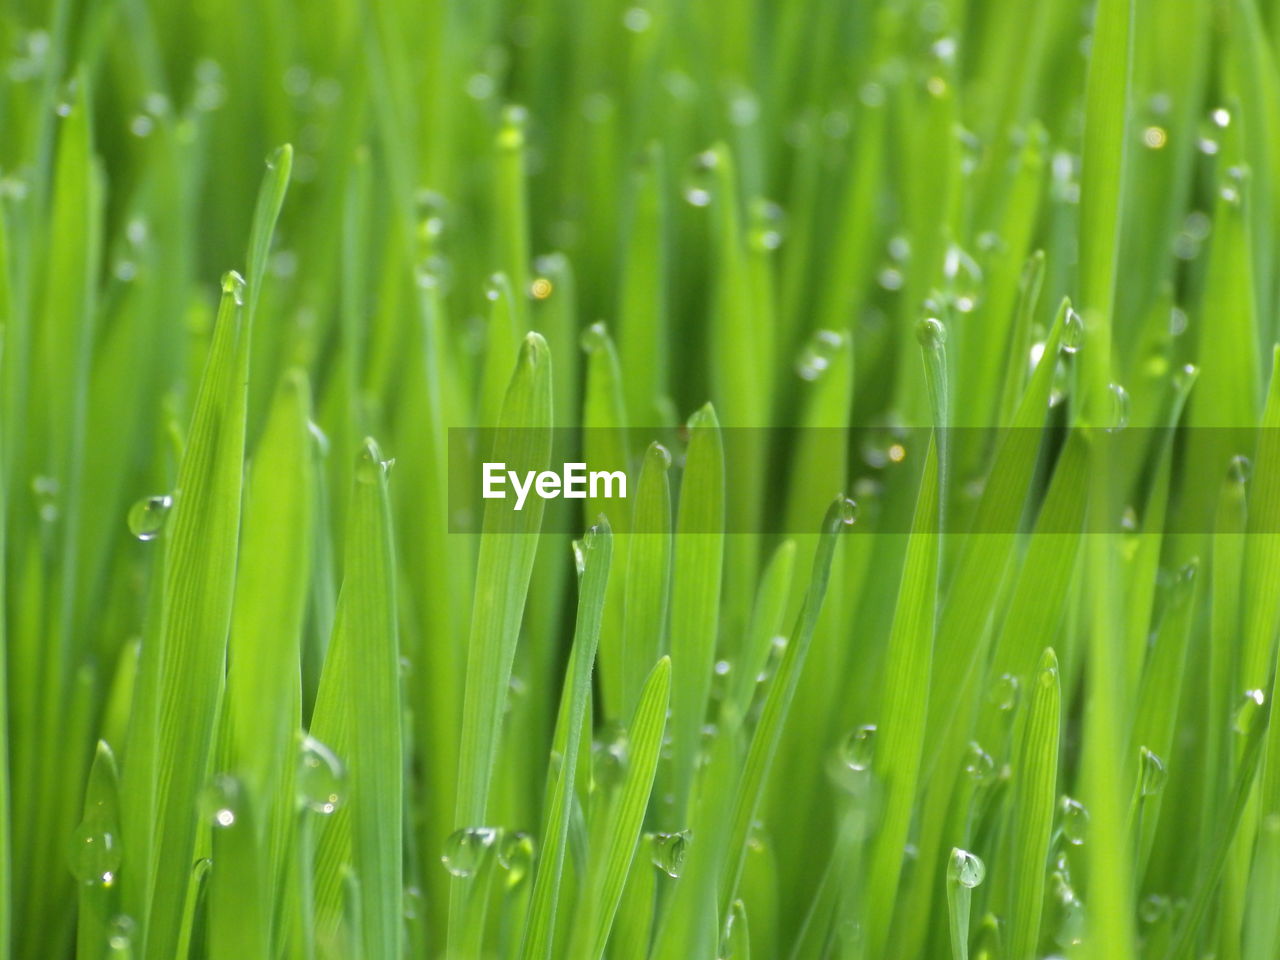 green, plant, growth, nature, grass, backgrounds, wheatgrass, beauty in nature, grassland, lawn, drop, wet, water, no people, full frame, freshness, field, close-up, moisture, blade of grass, environment, land, plant stem, dew, meadow, outdoors, leaf, agriculture, selective focus, day, macro photography, lush foliage, foliage, rain, landscape, flower, tranquility, plant part, crop